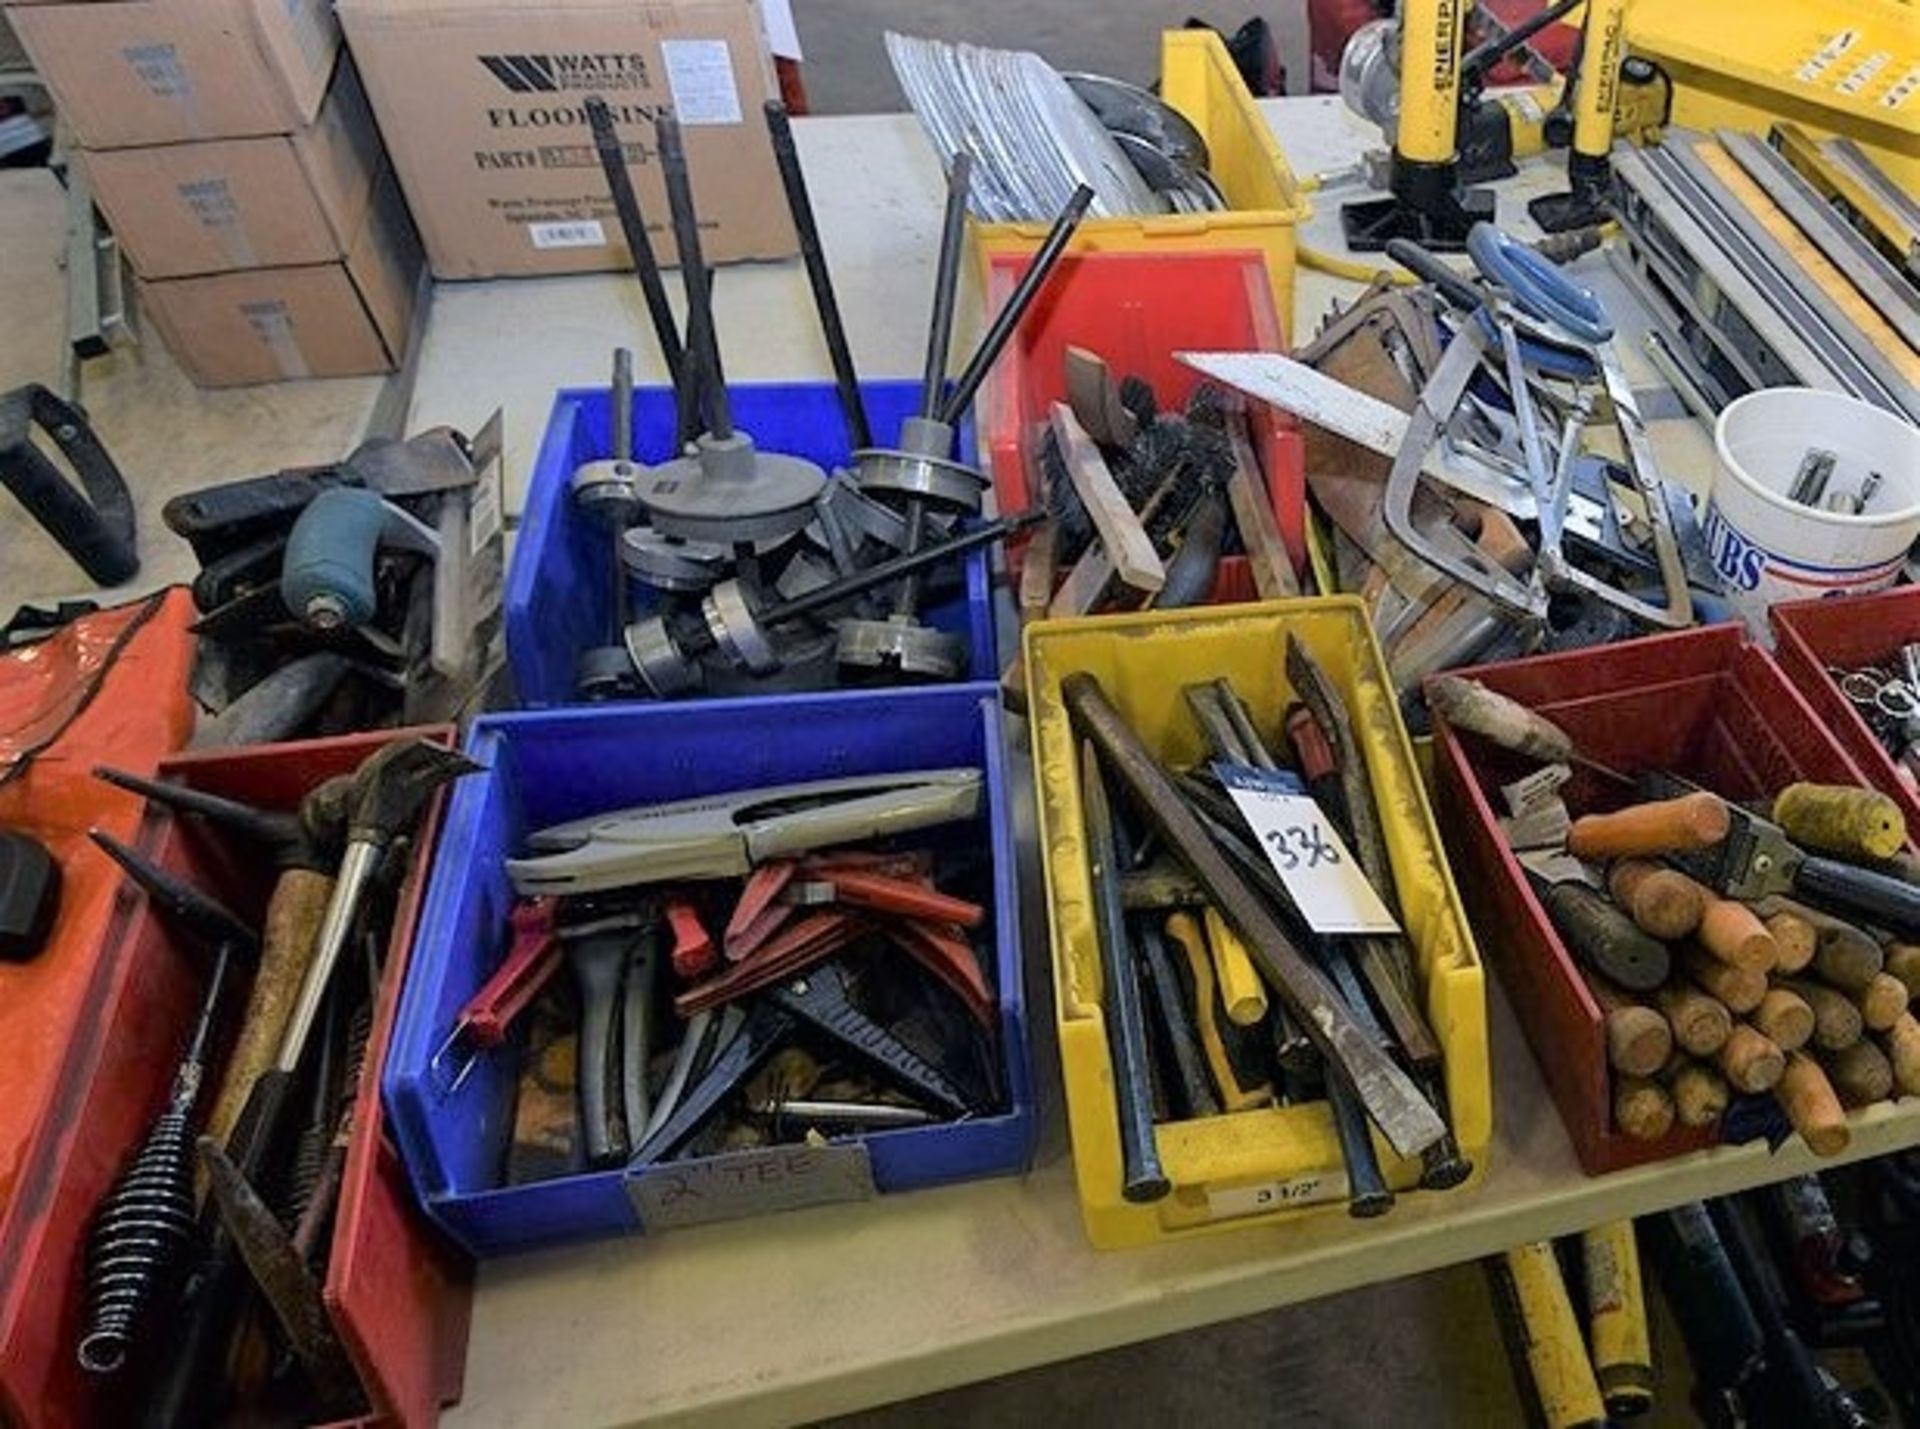 A Large Group of Ass't Hand Tools Including Saws, Chipping Hammers, Chisels, Pipe Cutters, and Wire